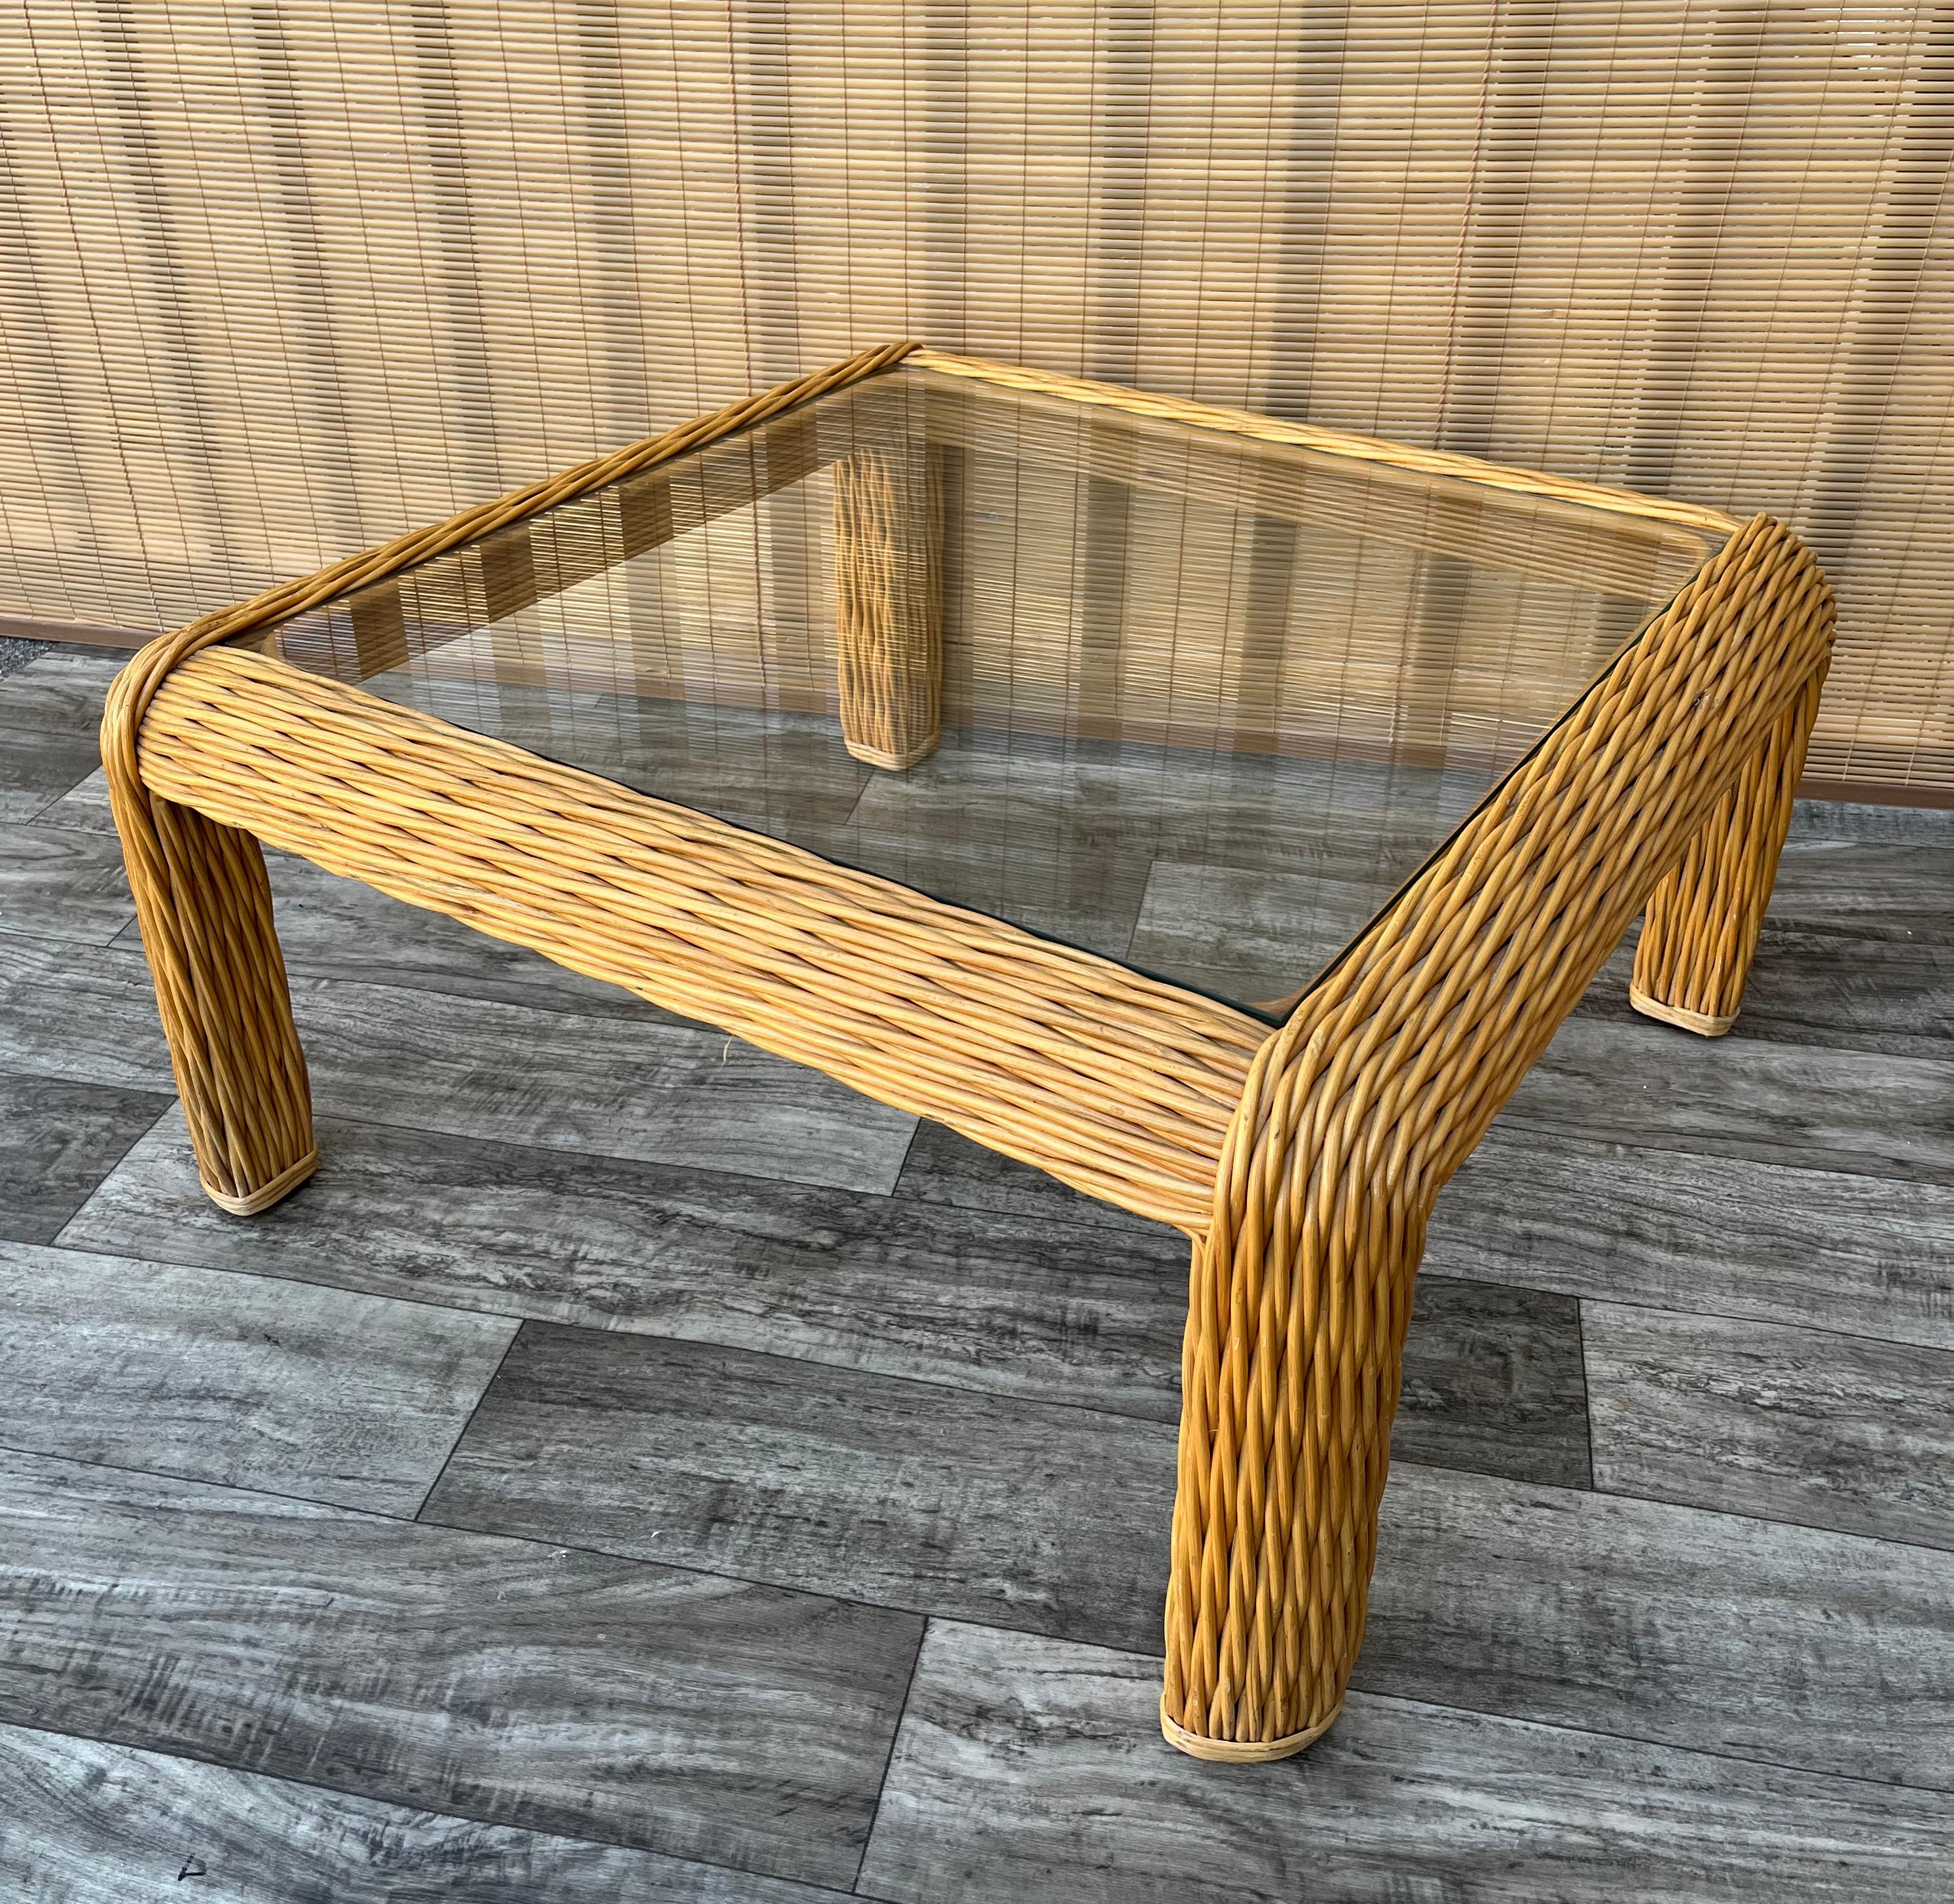 Vintage Coastal Style Braided Pencil Reed Rattan Coffee / Cocktail Table in the McGuire style. Circa 1980s.
Features sophisticated curves, an elaborated braided pencil reed construction and an a glass top.
In excellent original condition with